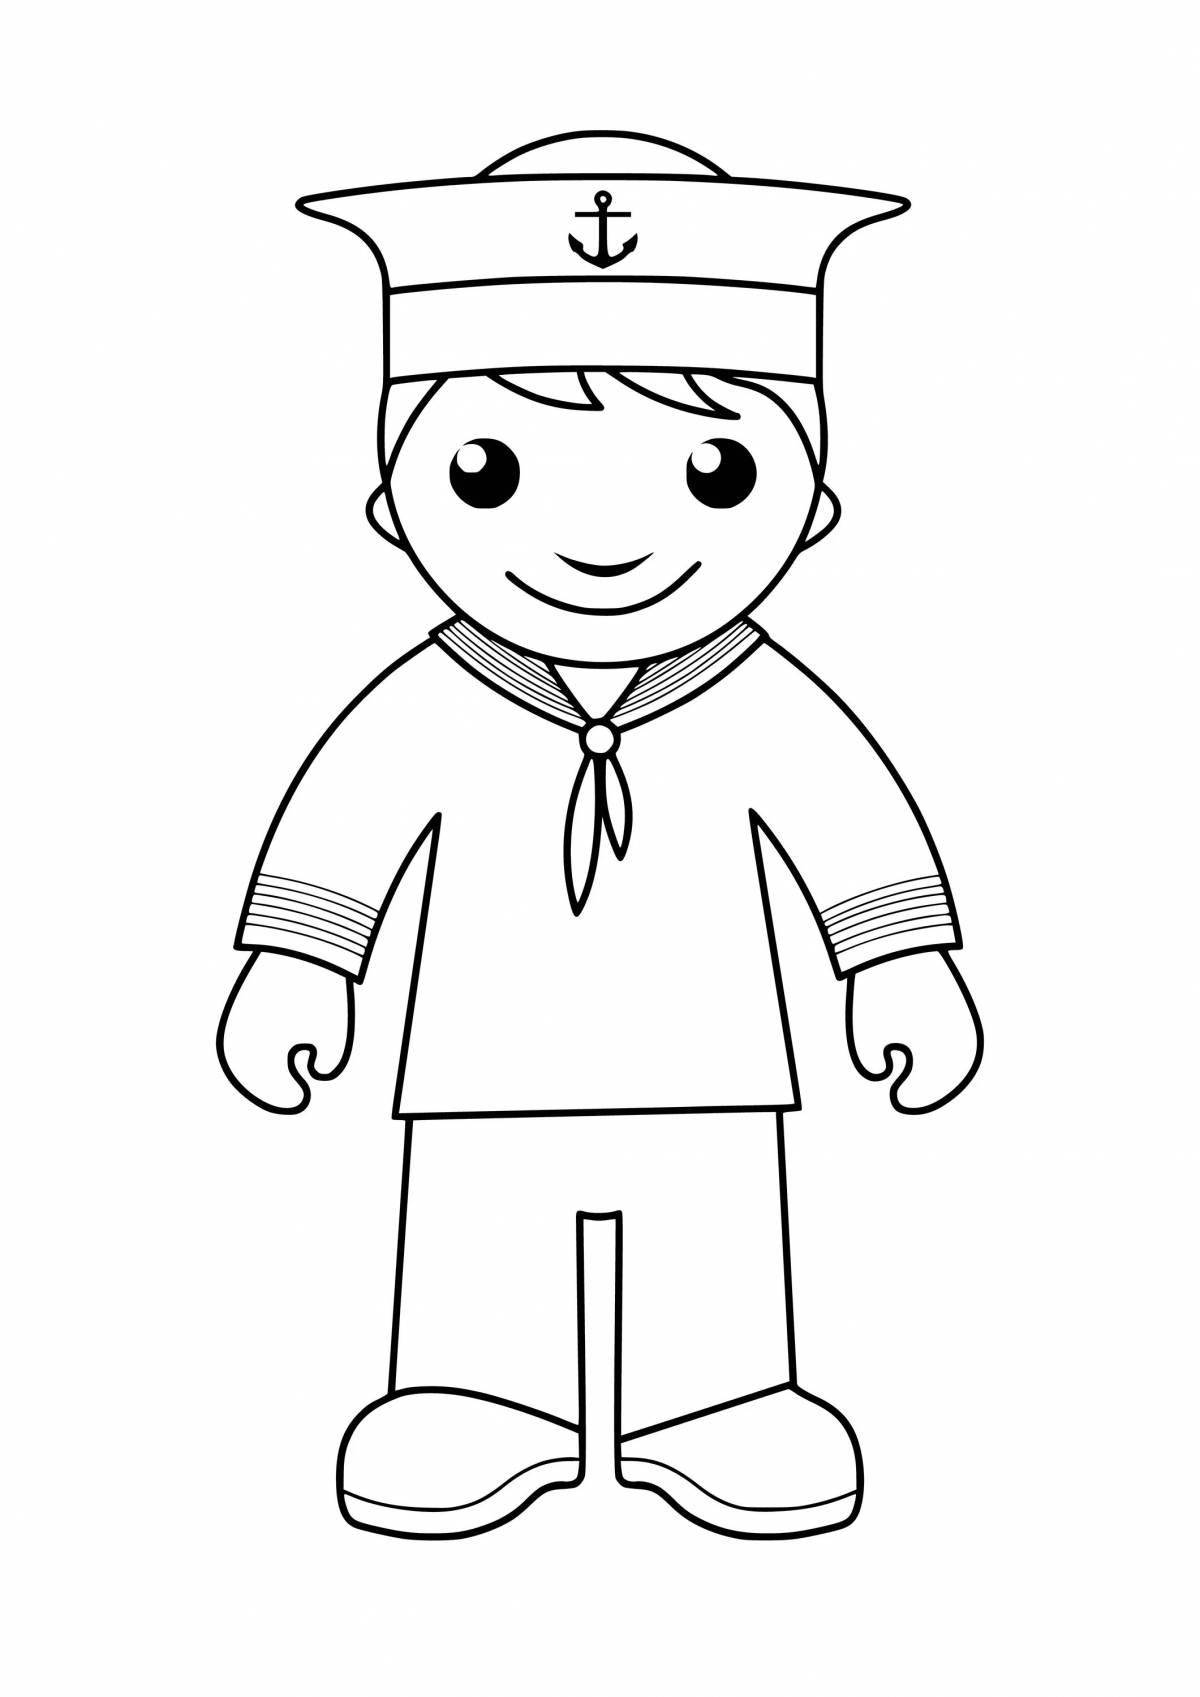 Fun military profession coloring book for children 3-4 years old